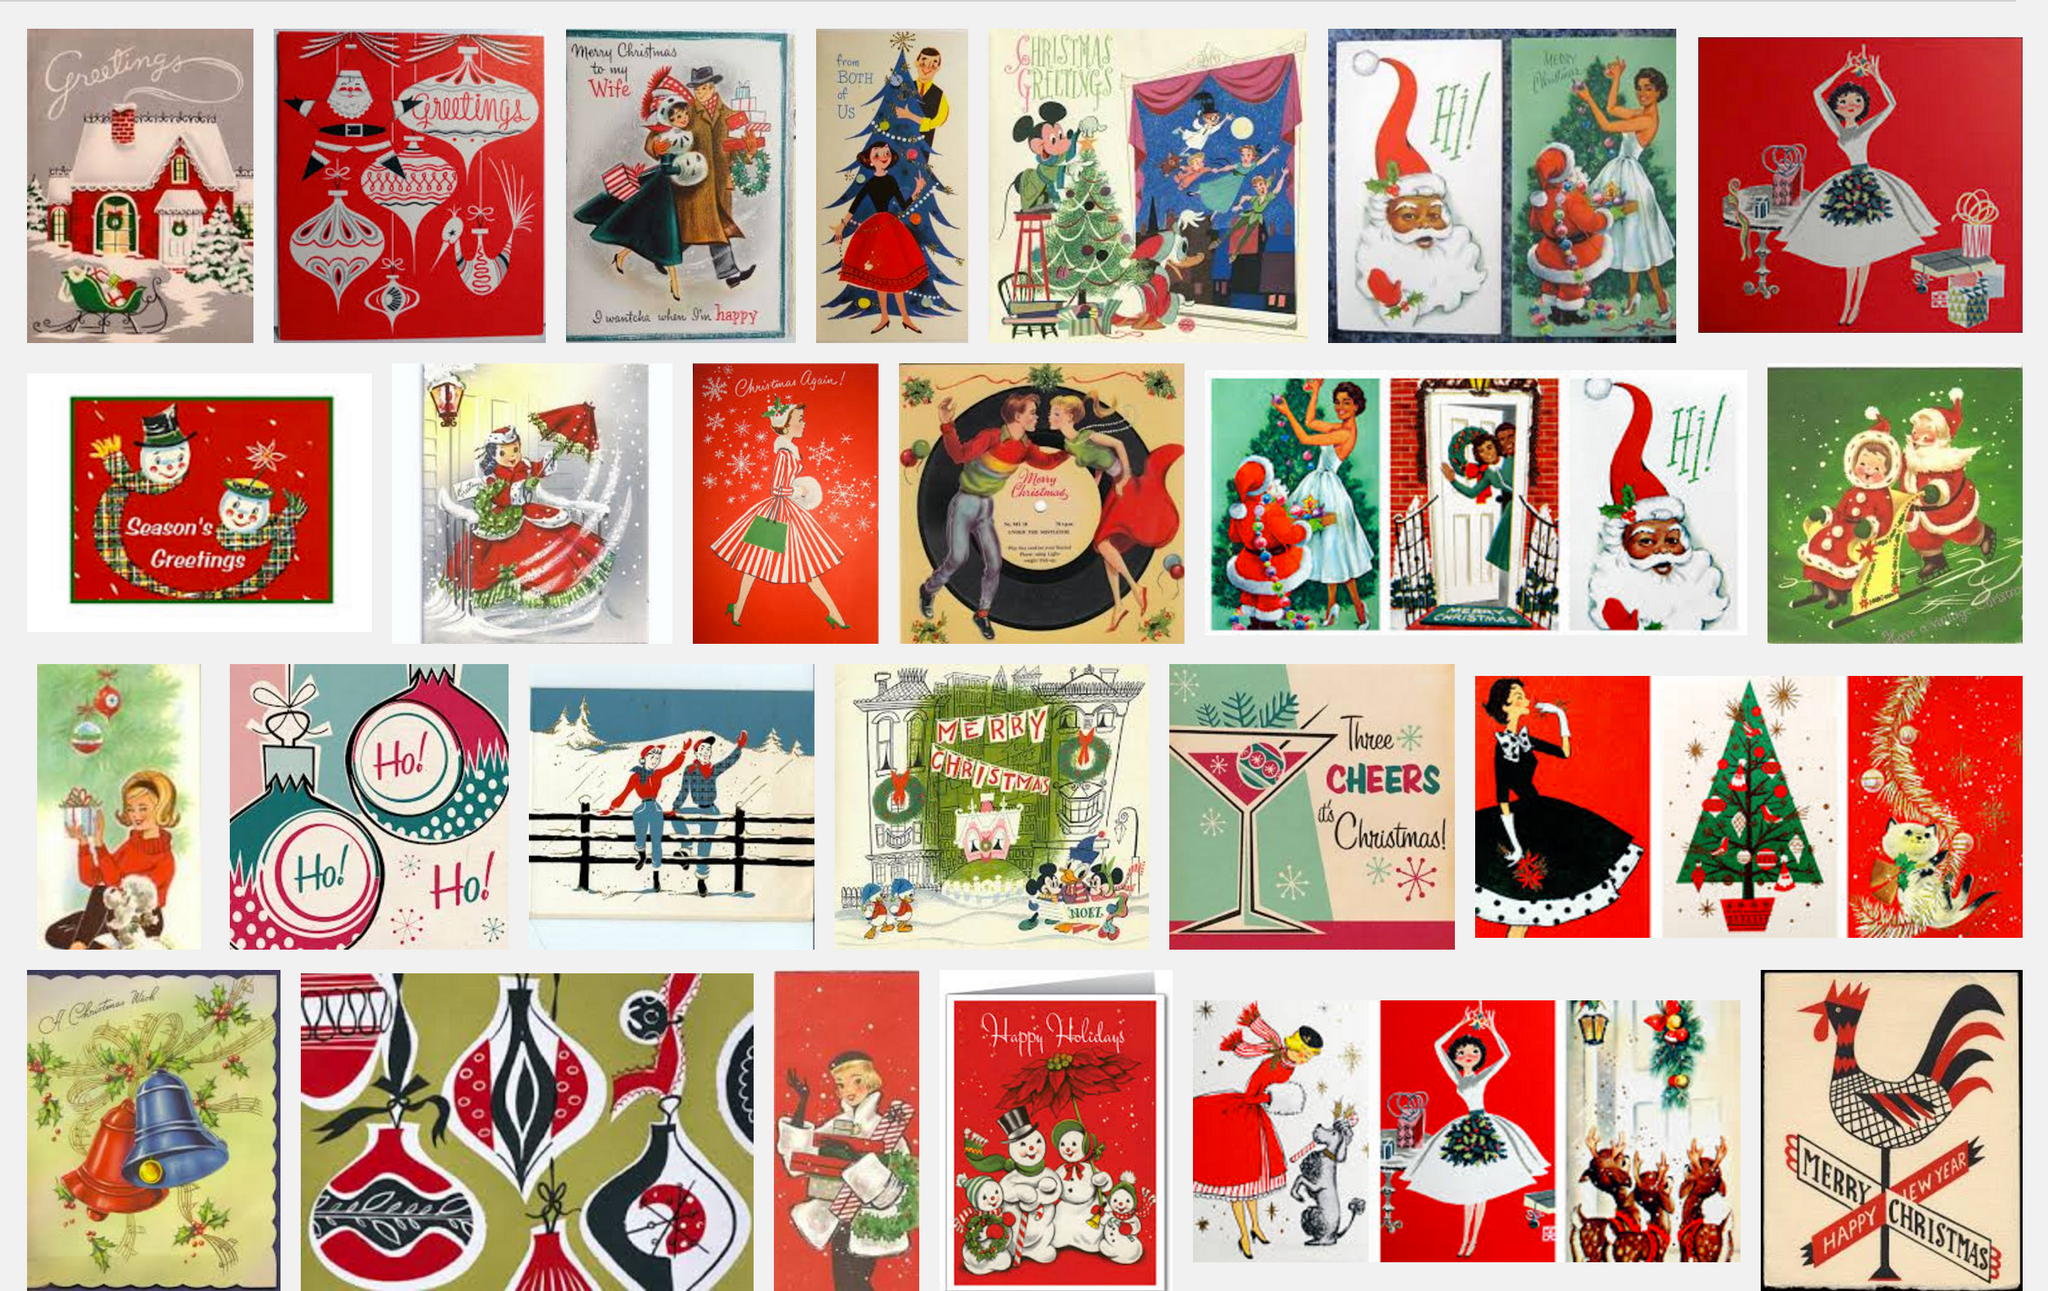 Google image search of greeting cards from the 1950's